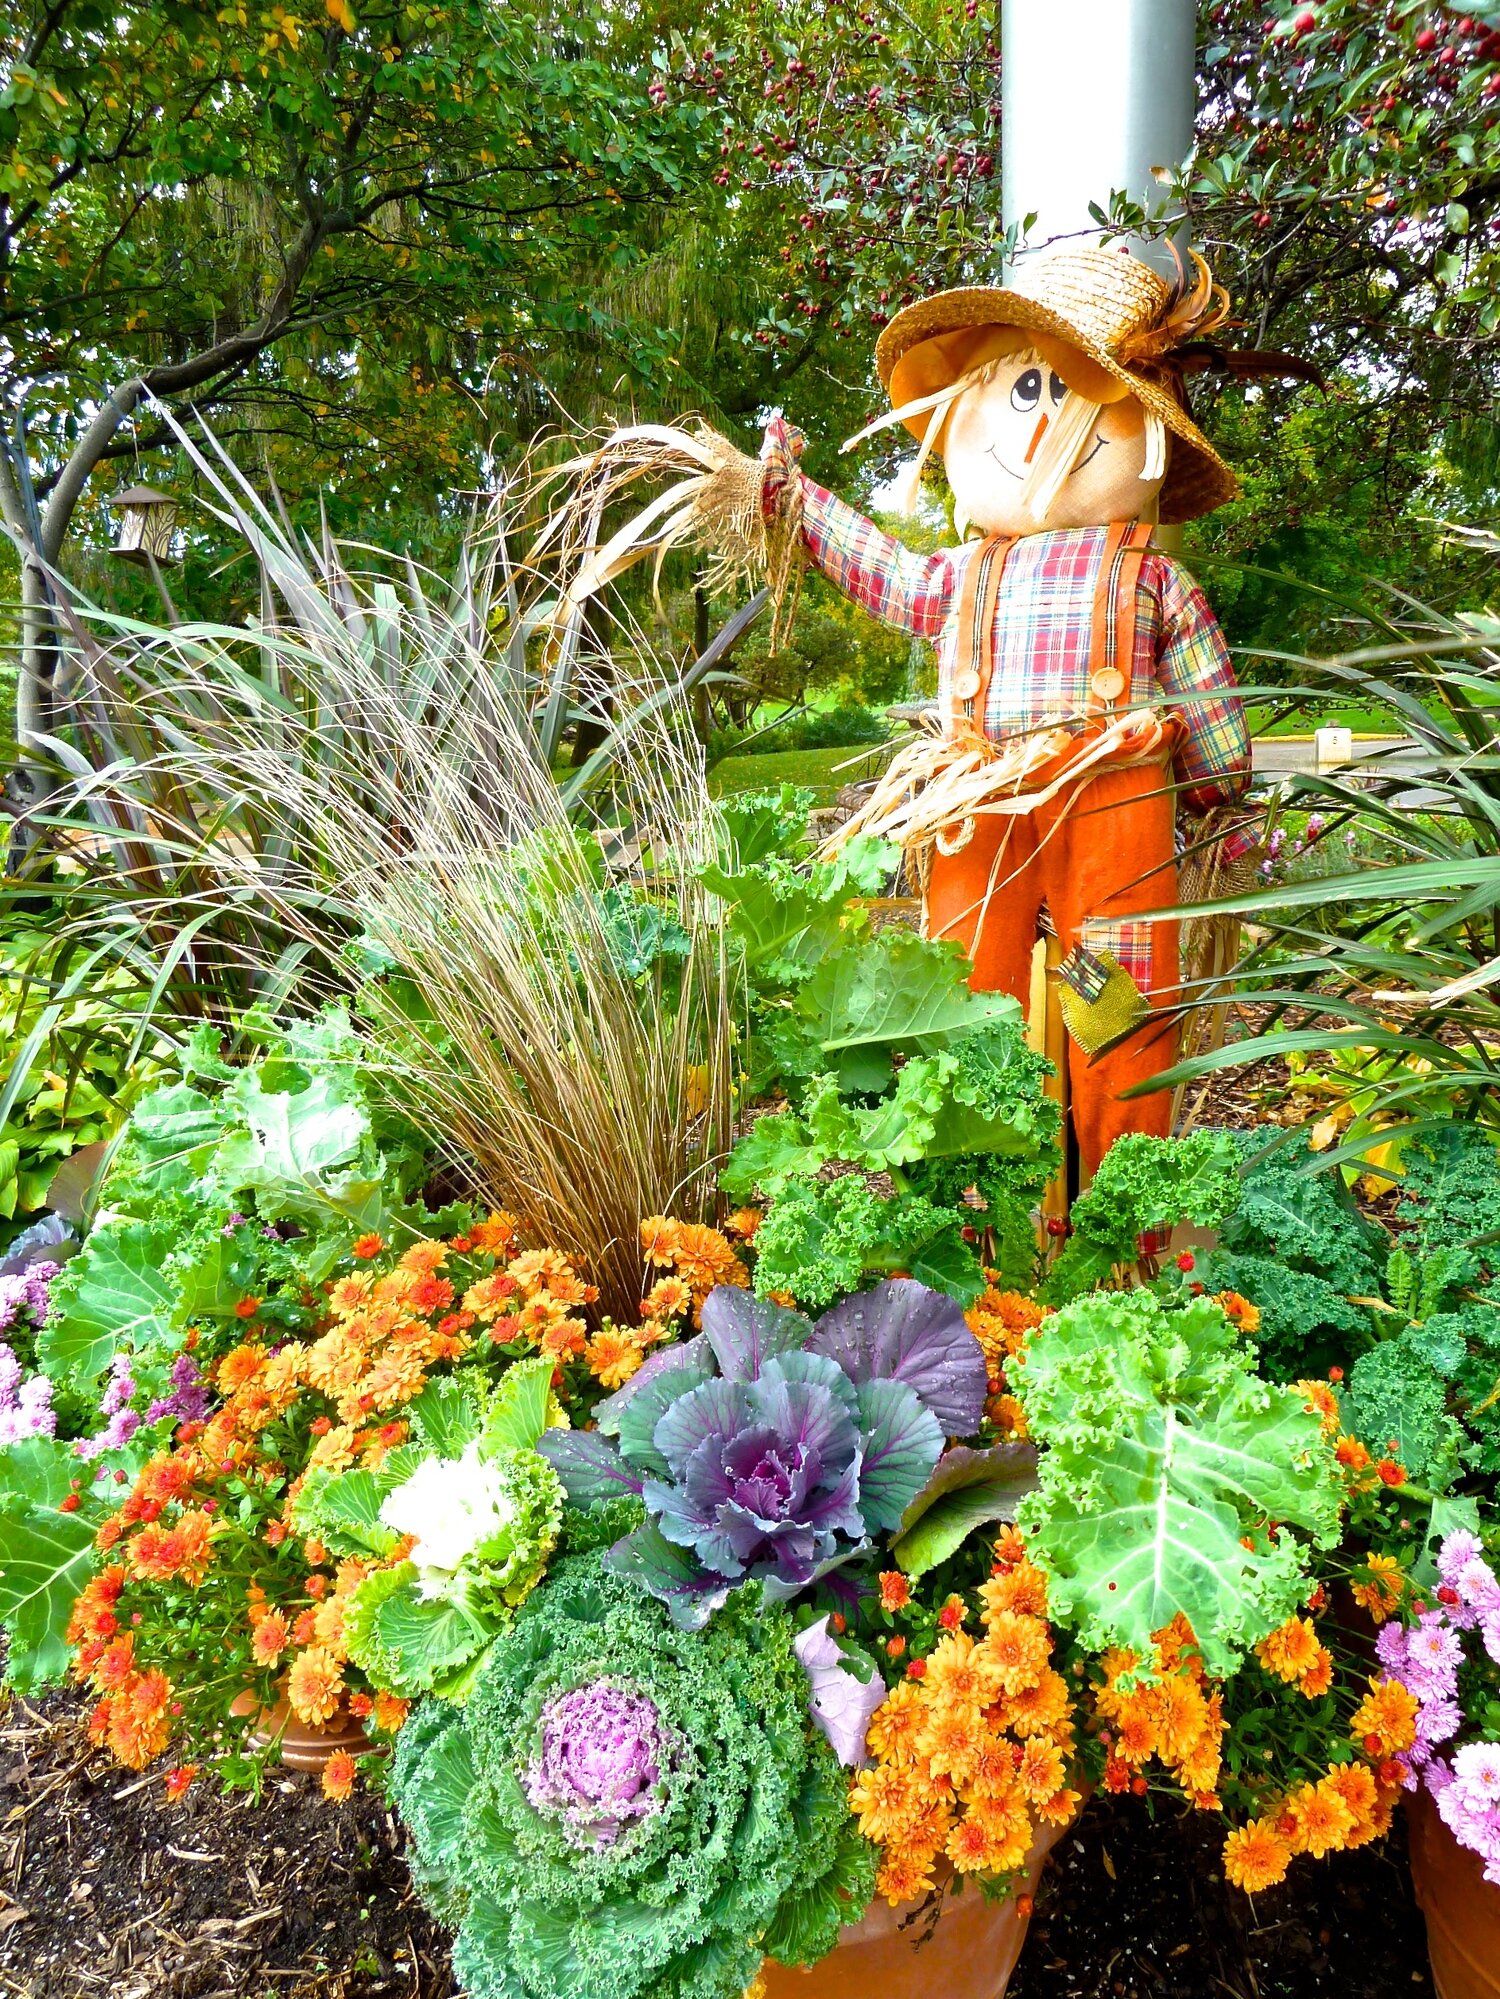 Scarecrows + Pumpkins + Flowers = Fall